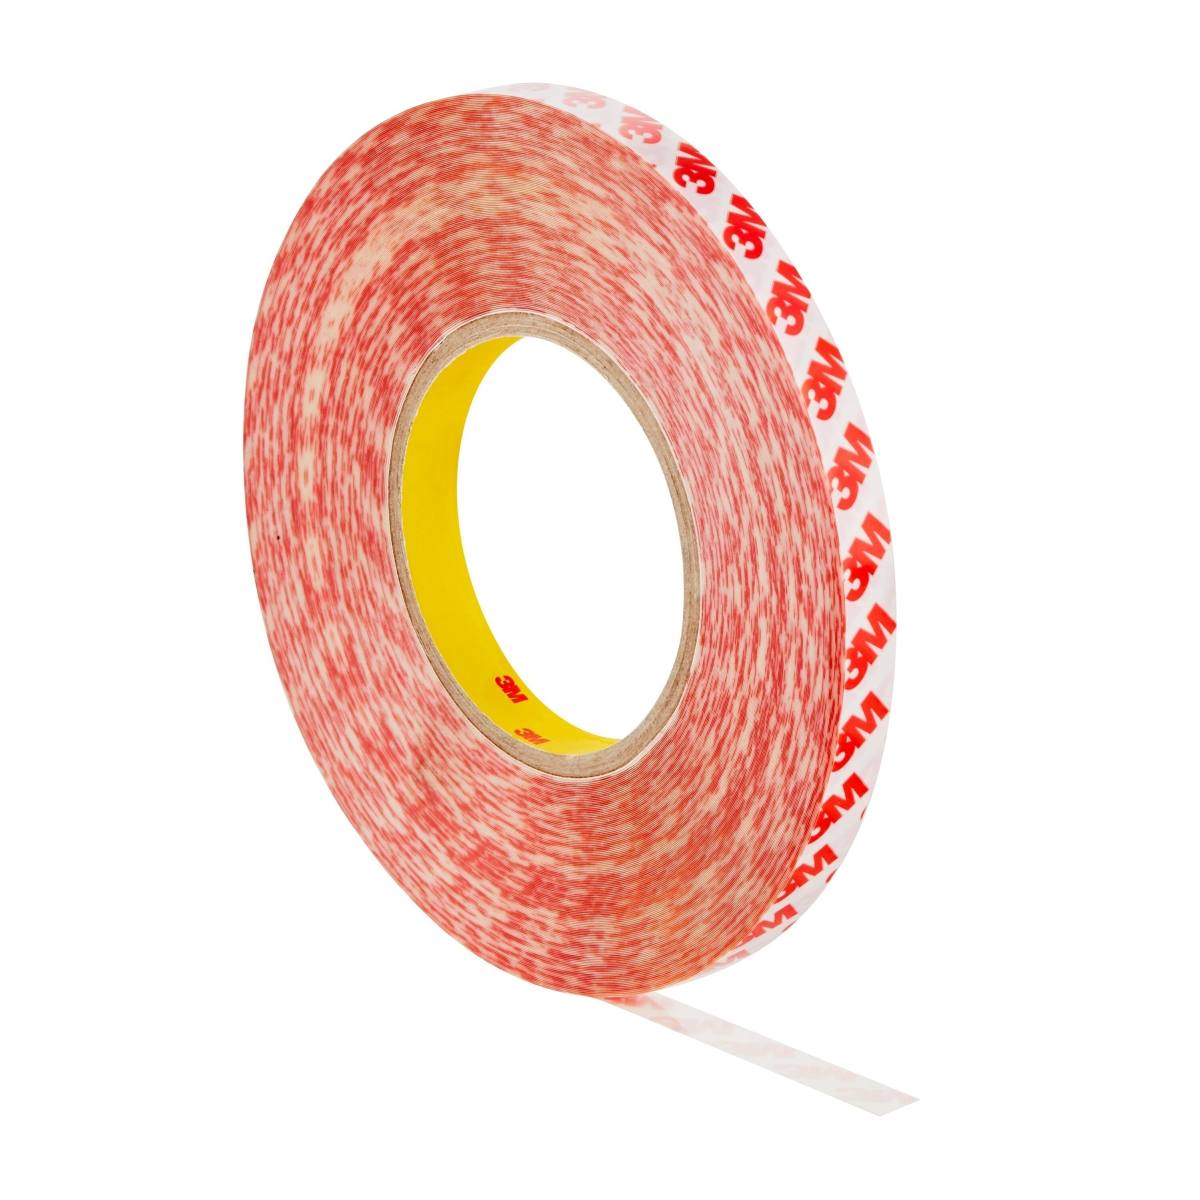 3M Double-sided adhesive tape with polyester backing GPT-020P, transparent, 38 mm x 50 m, 0.202 mm